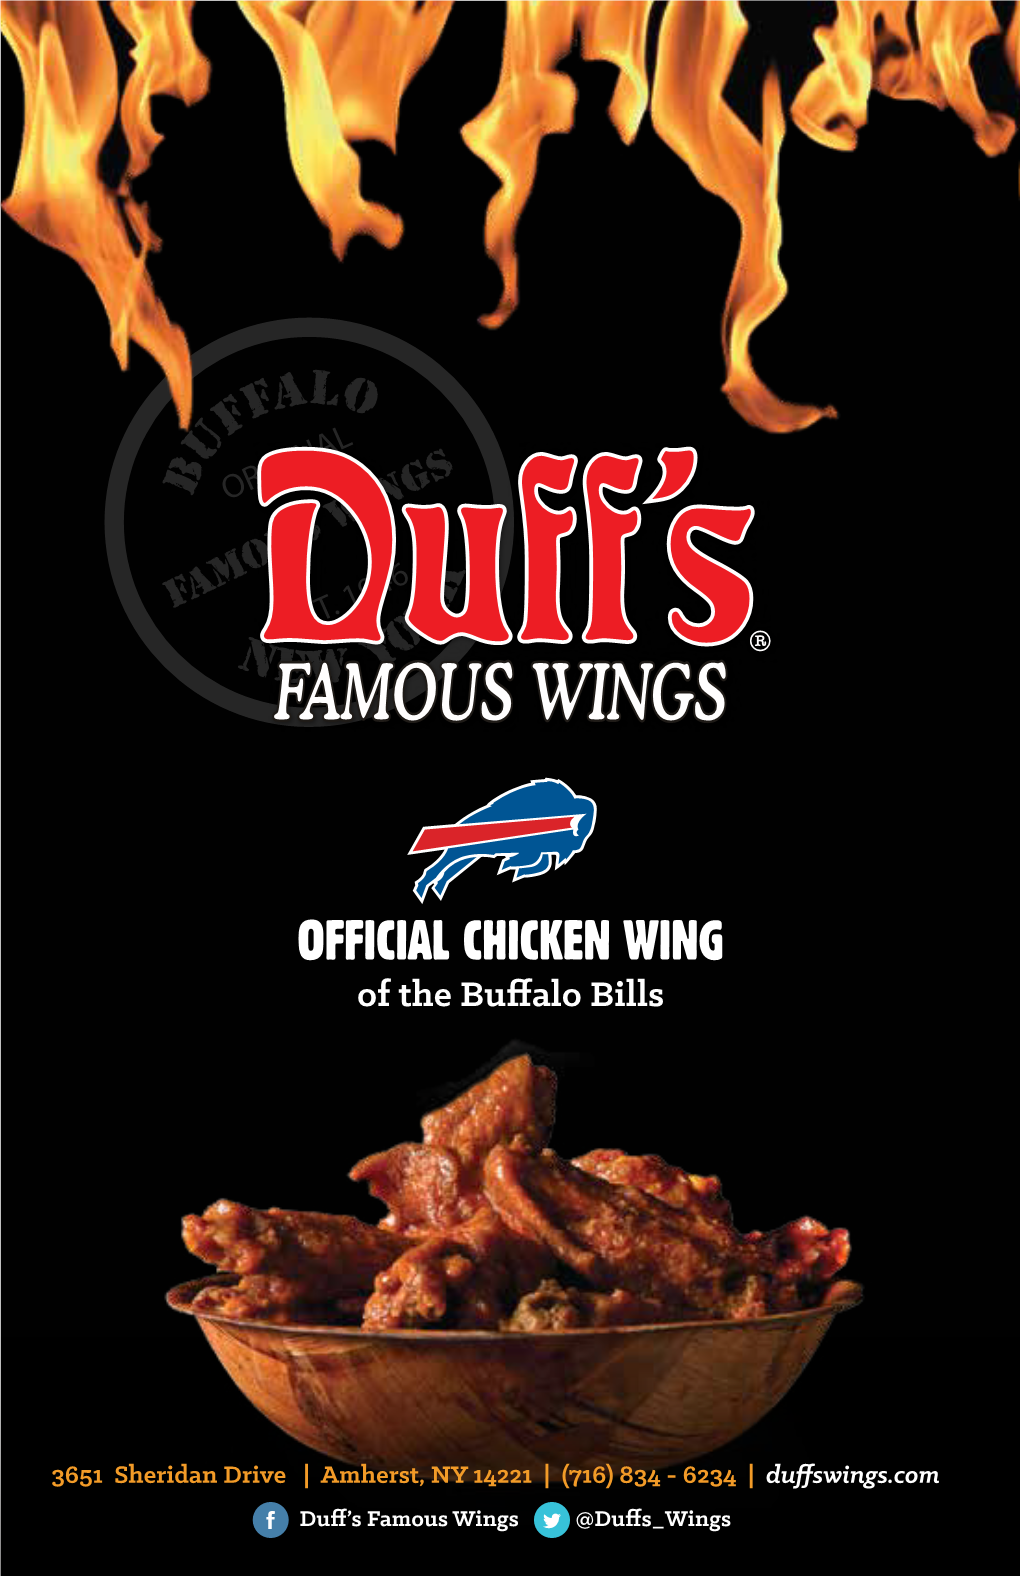 OFFICIAL CHICKEN WING of the Bu Alo Bills